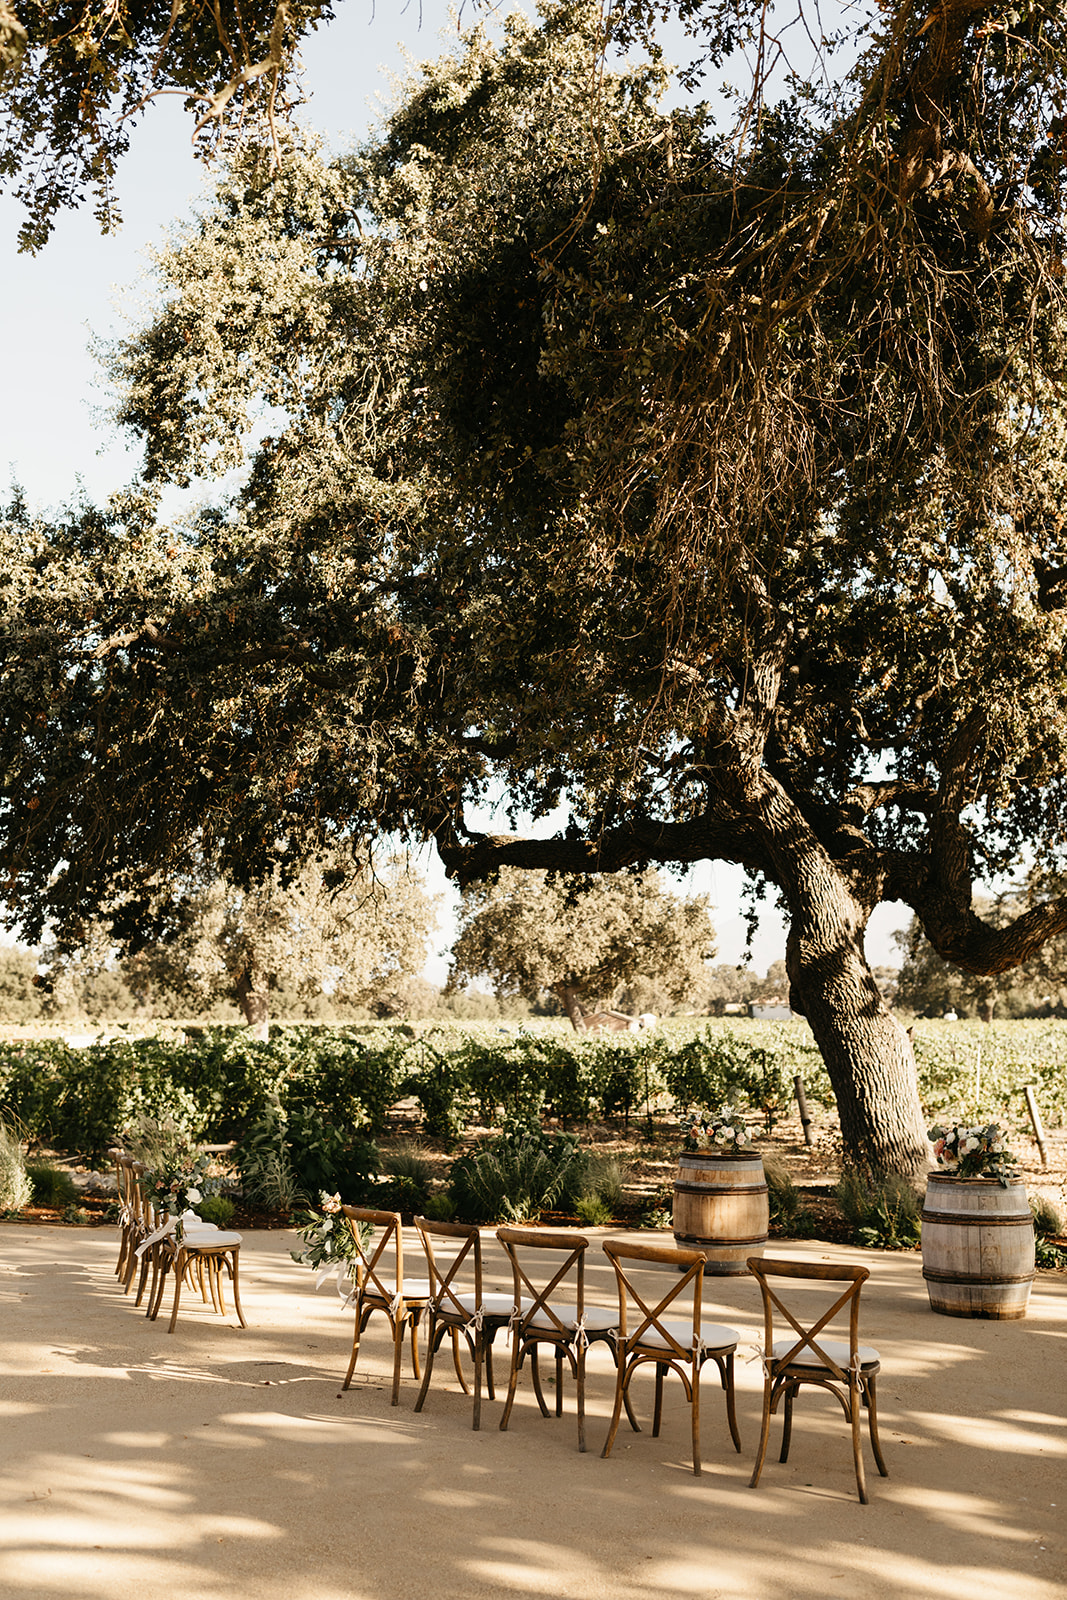 An intimate vineyard wedding ceremony at Roblar winery with 10 cross back chairs